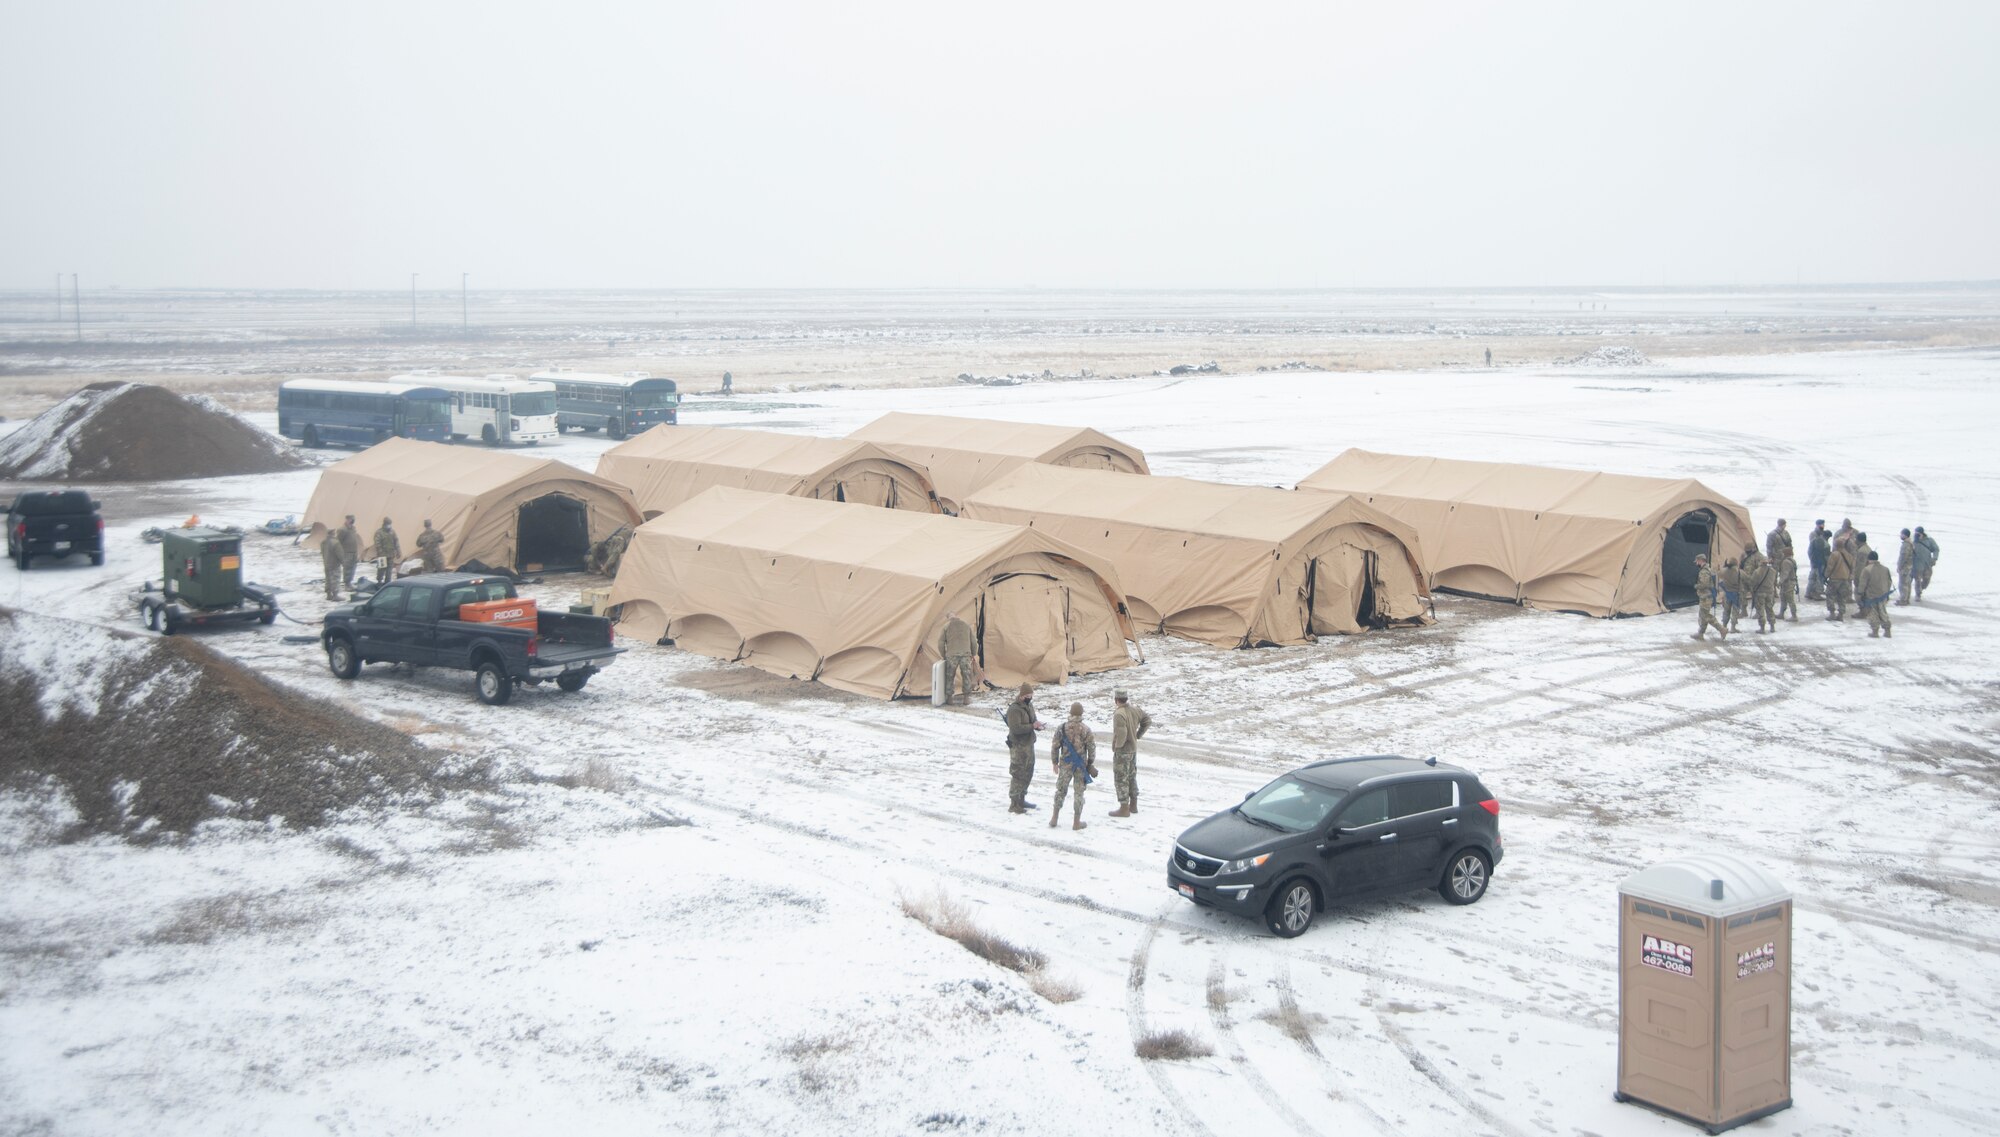 A picture of six large tents sitting on a snowy land.